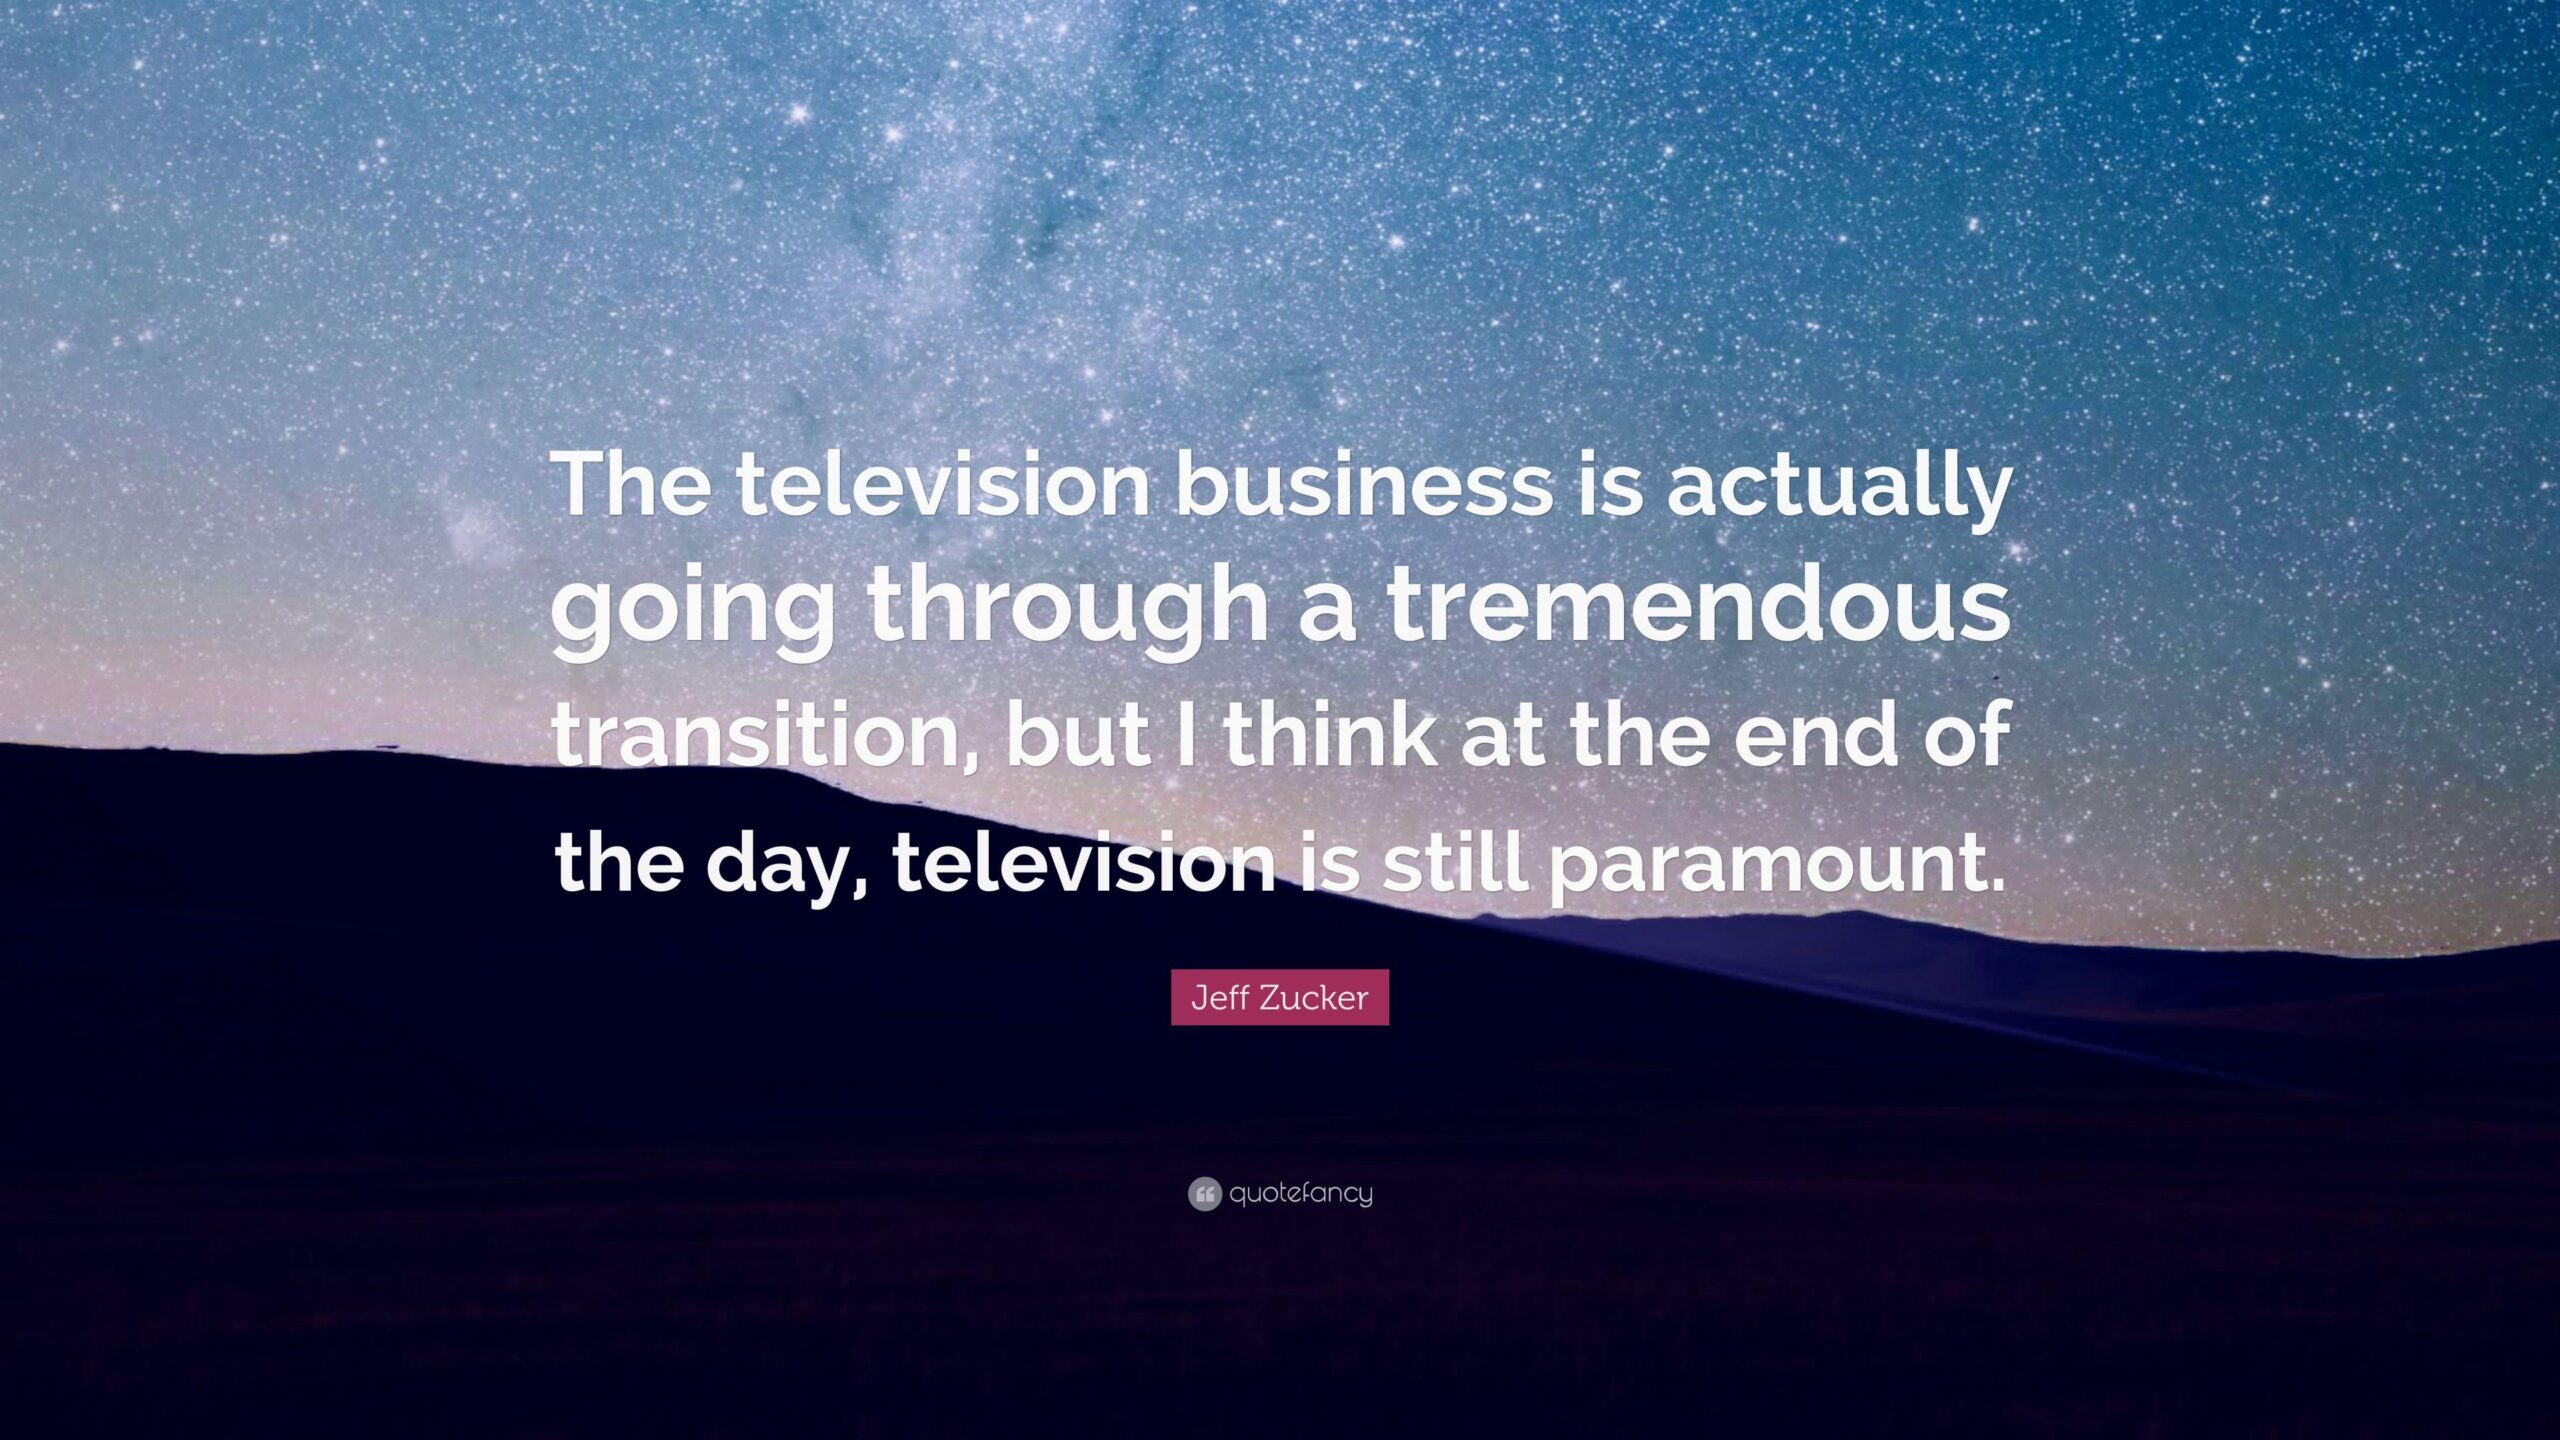 Jeff Zucker Quote “The television business is actually going